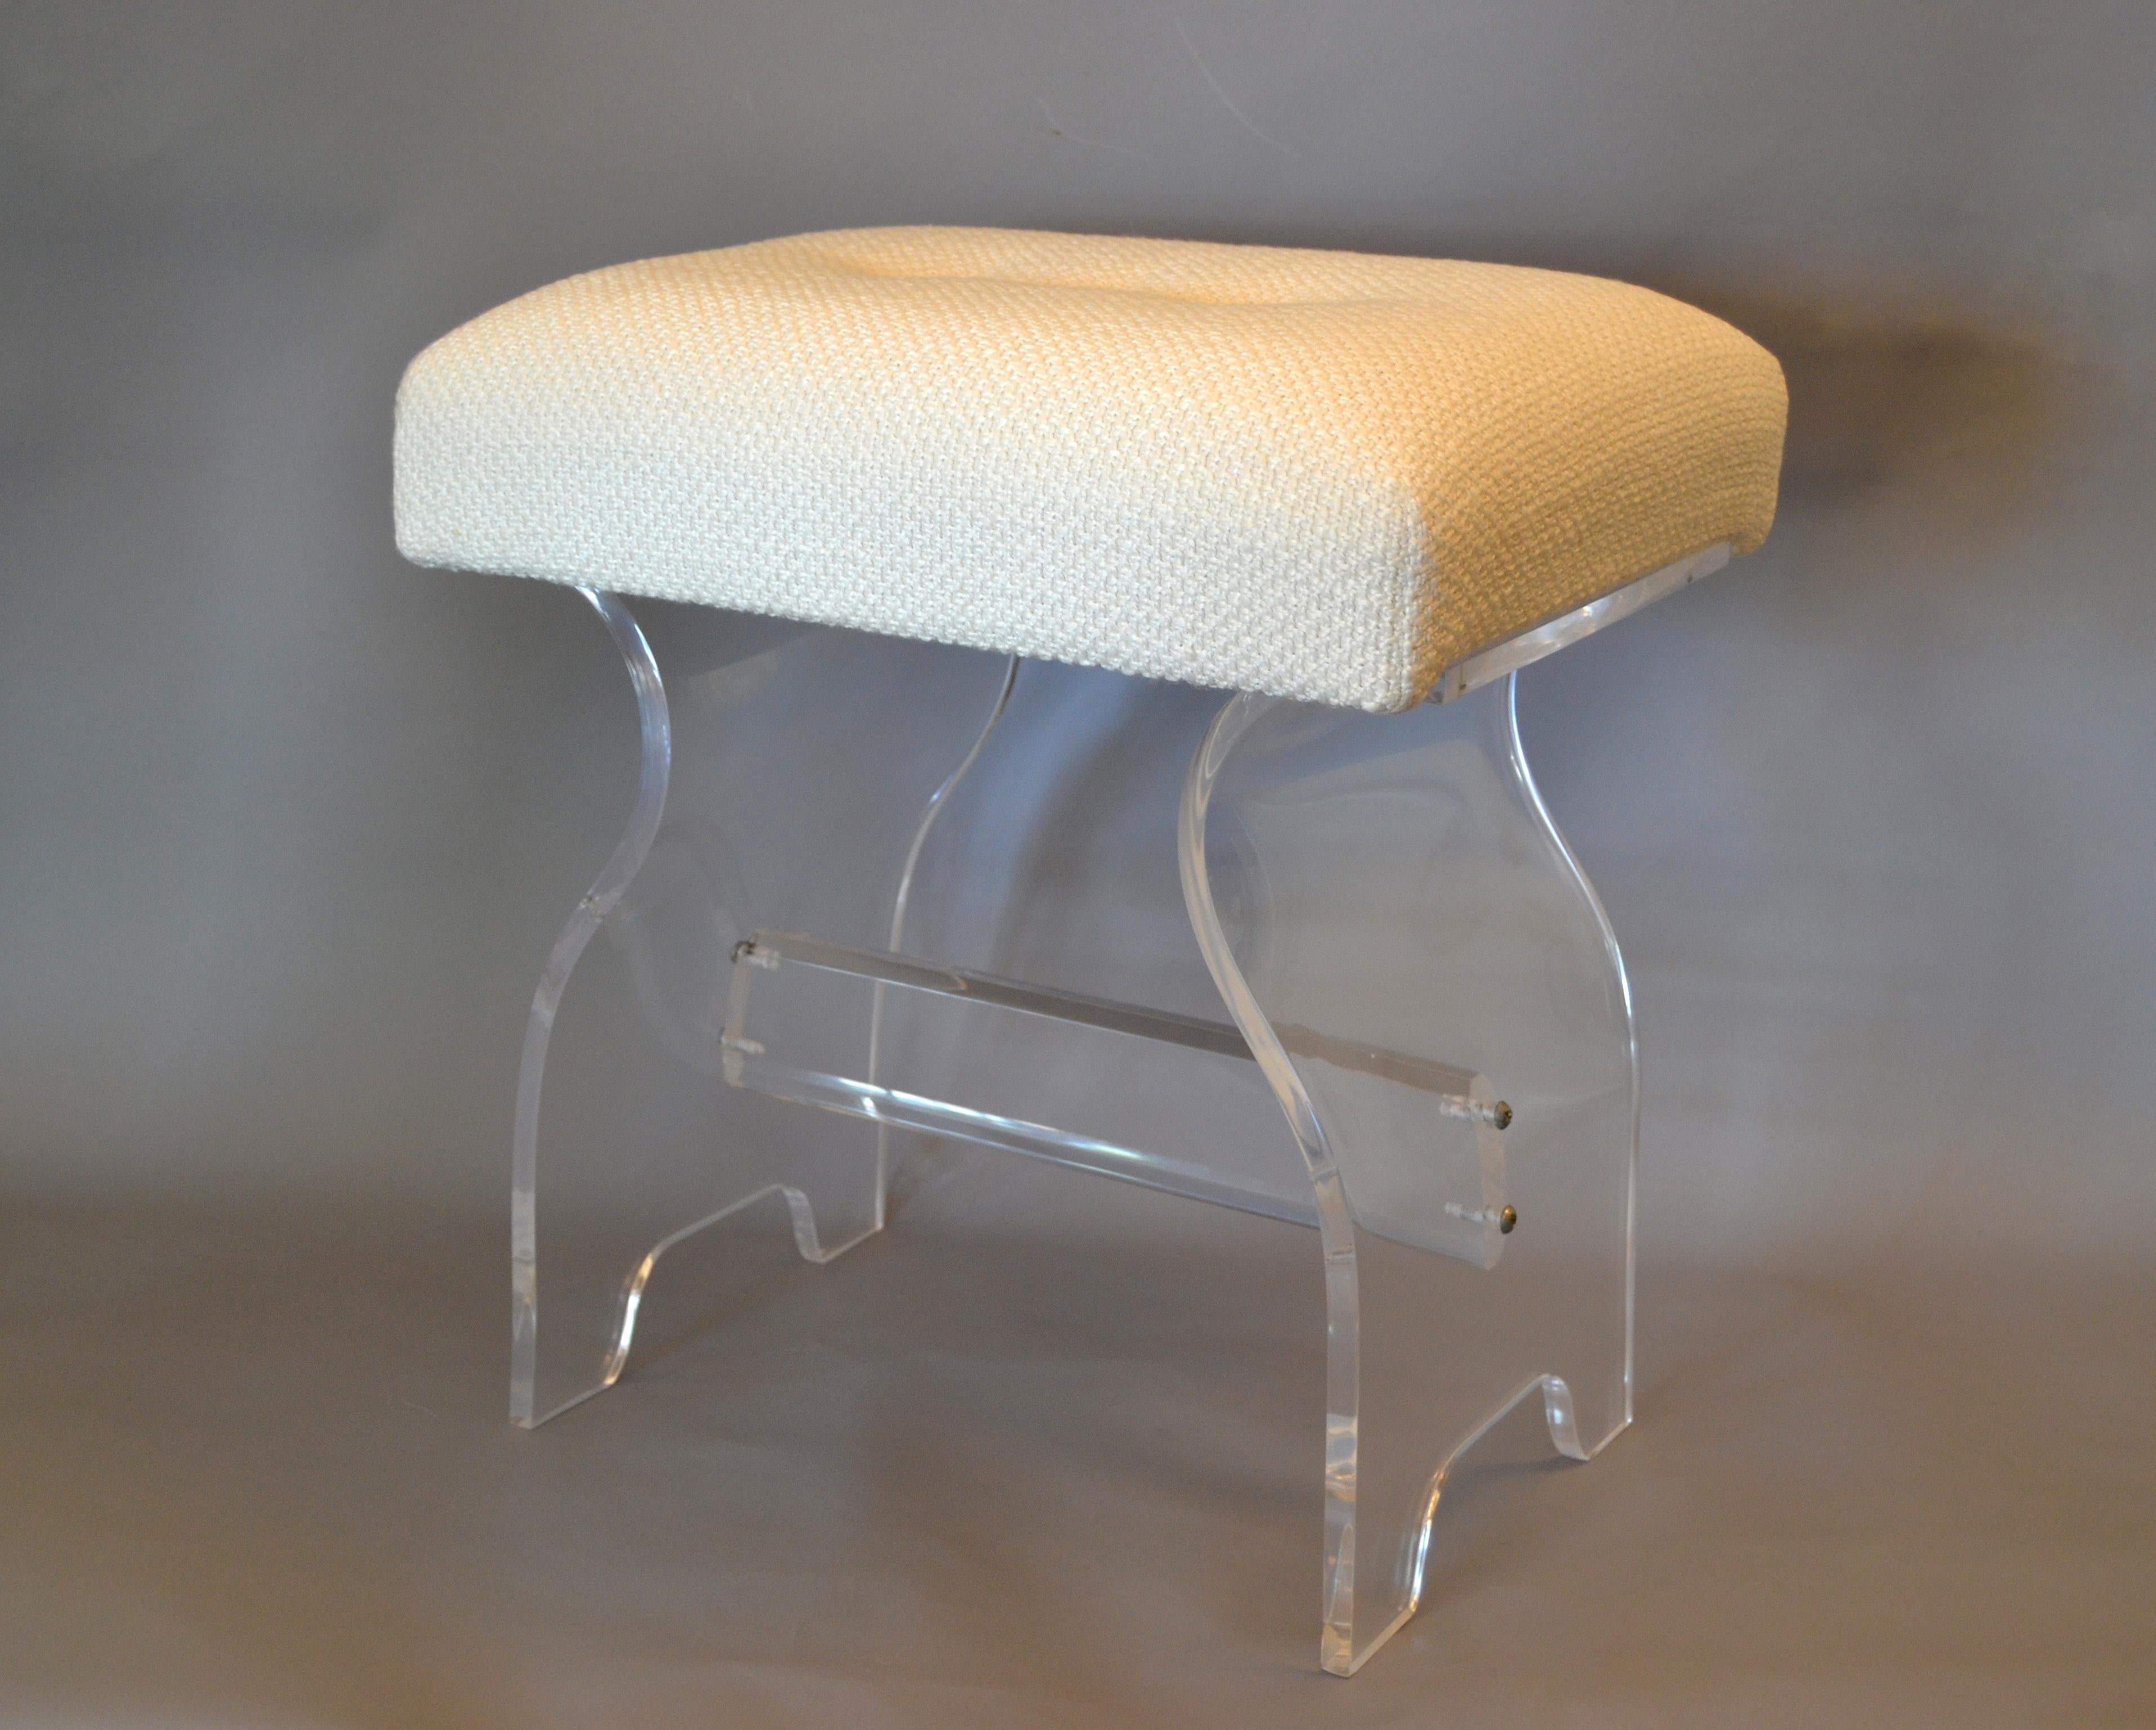 Mid-Century Modern Lucite stool with newly upholstered boucle fabric seat.
This stool can be used as a footstool, vanity stool or a place to put your magazine.
Note the interesting base.
This piece is ready to enjoy.